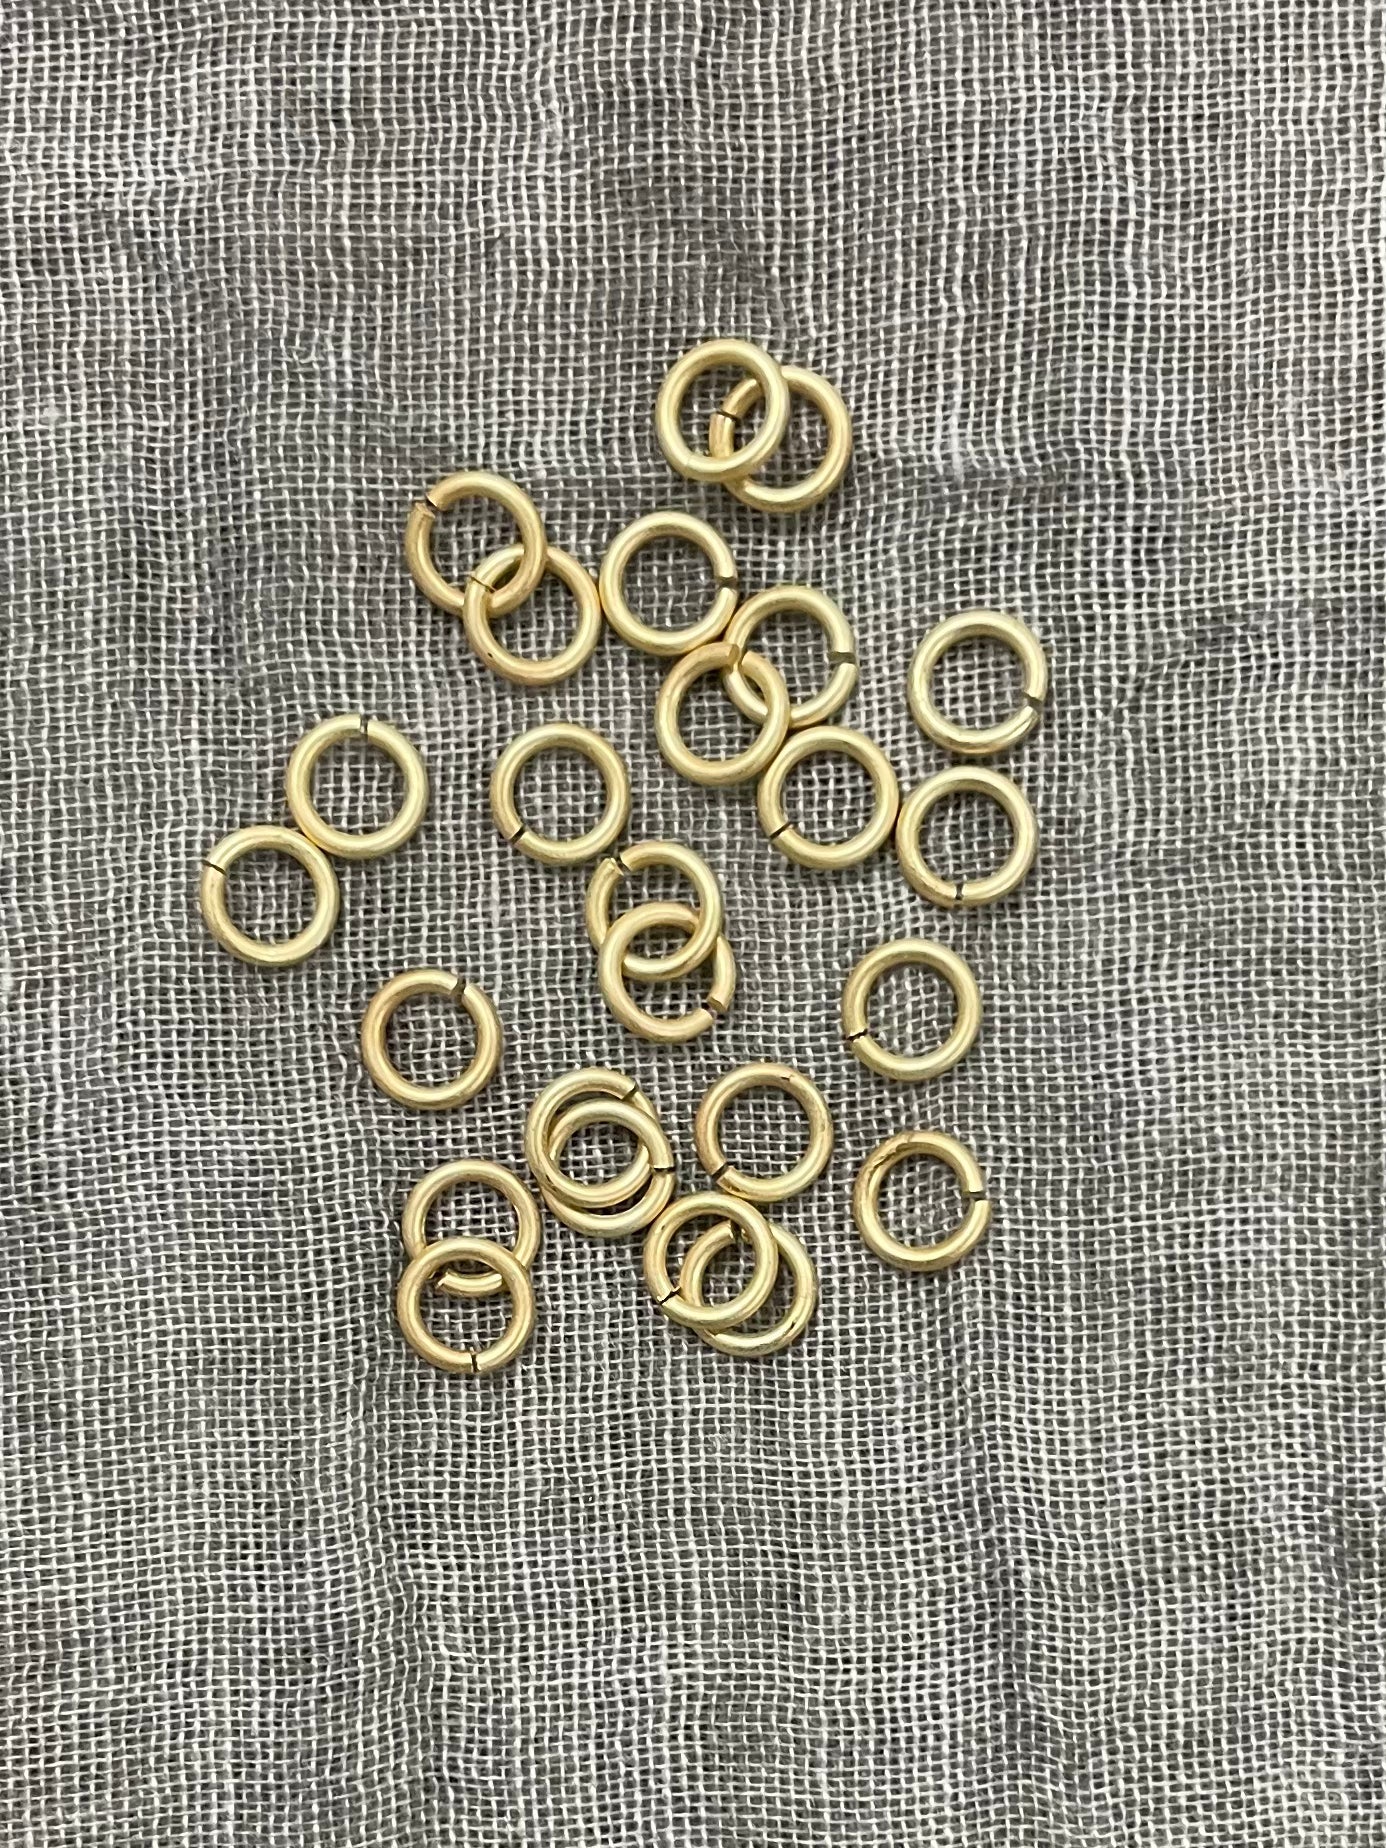 6mm/18g Jump Rings- Bright Gold